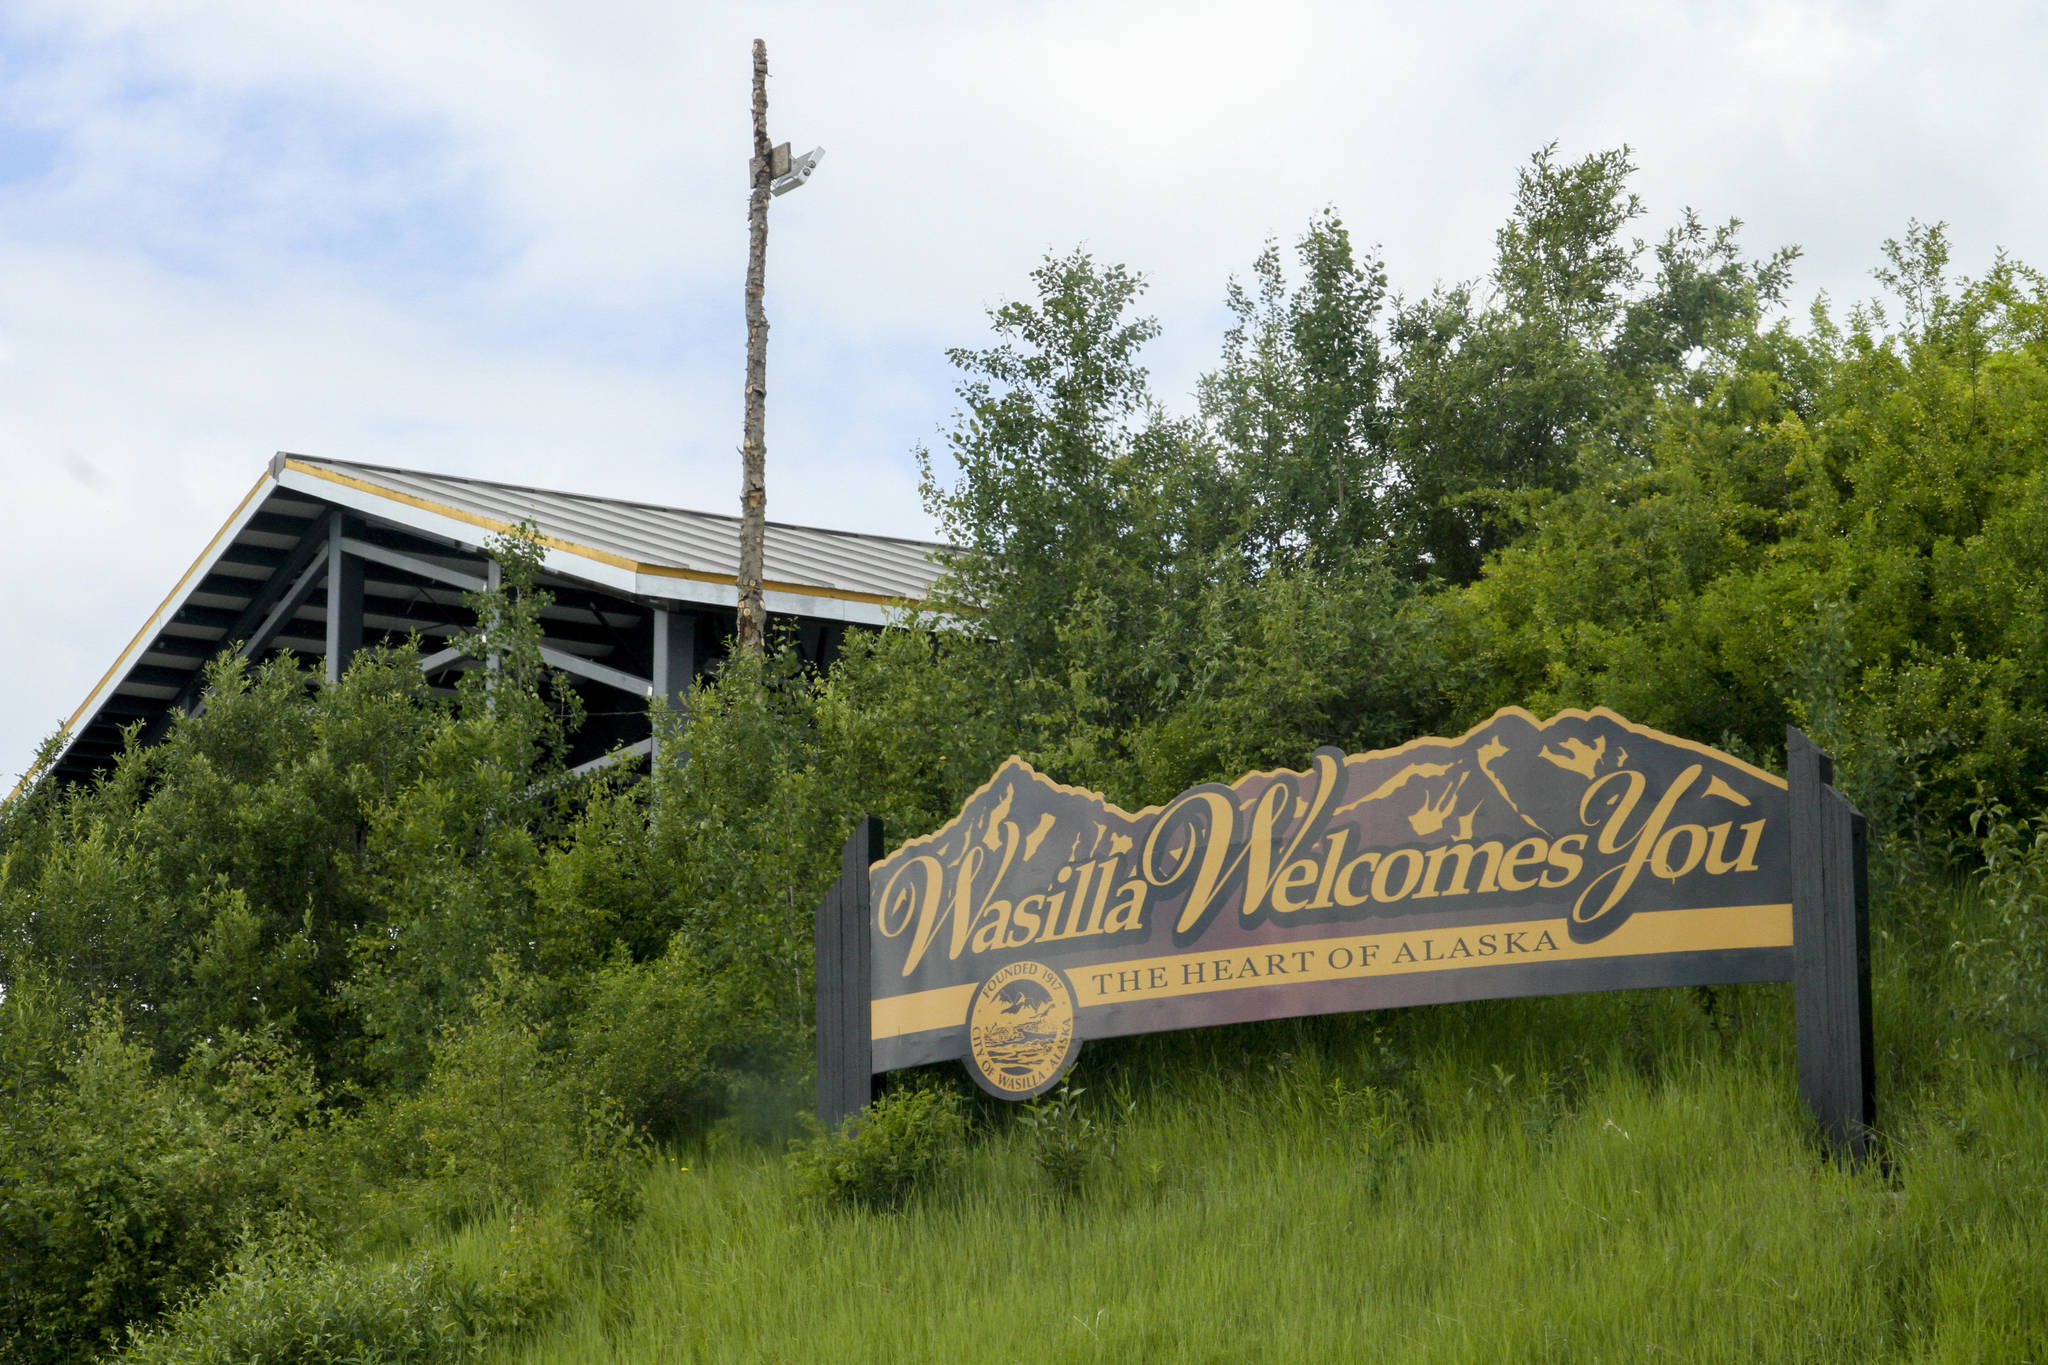 This June 14 photo shows a Wasilla sign on the outskirts of Wasilla. Gov. Mike Dunleavy has called lawmakers into special session in Wasilla beginning July 8, but some lawmakers have expressed concerns over security and logistics with the location more than 500 miles from the state capital of Juneau. (AP Photo/Mark Thiessen)